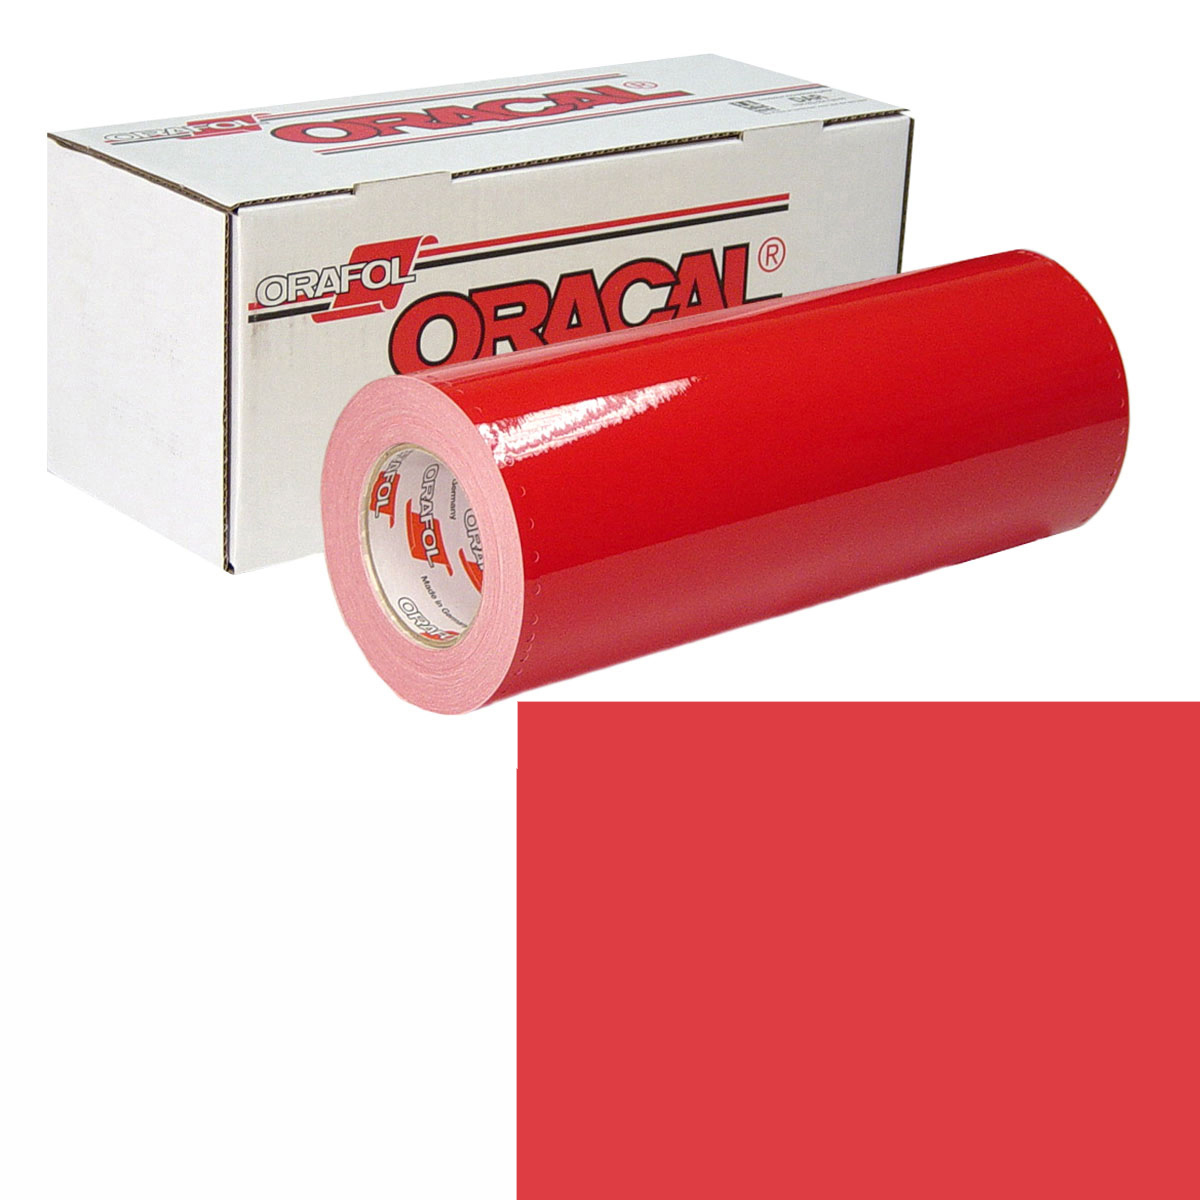 ORACAL 951 30in X 50yd 347 Red Coral